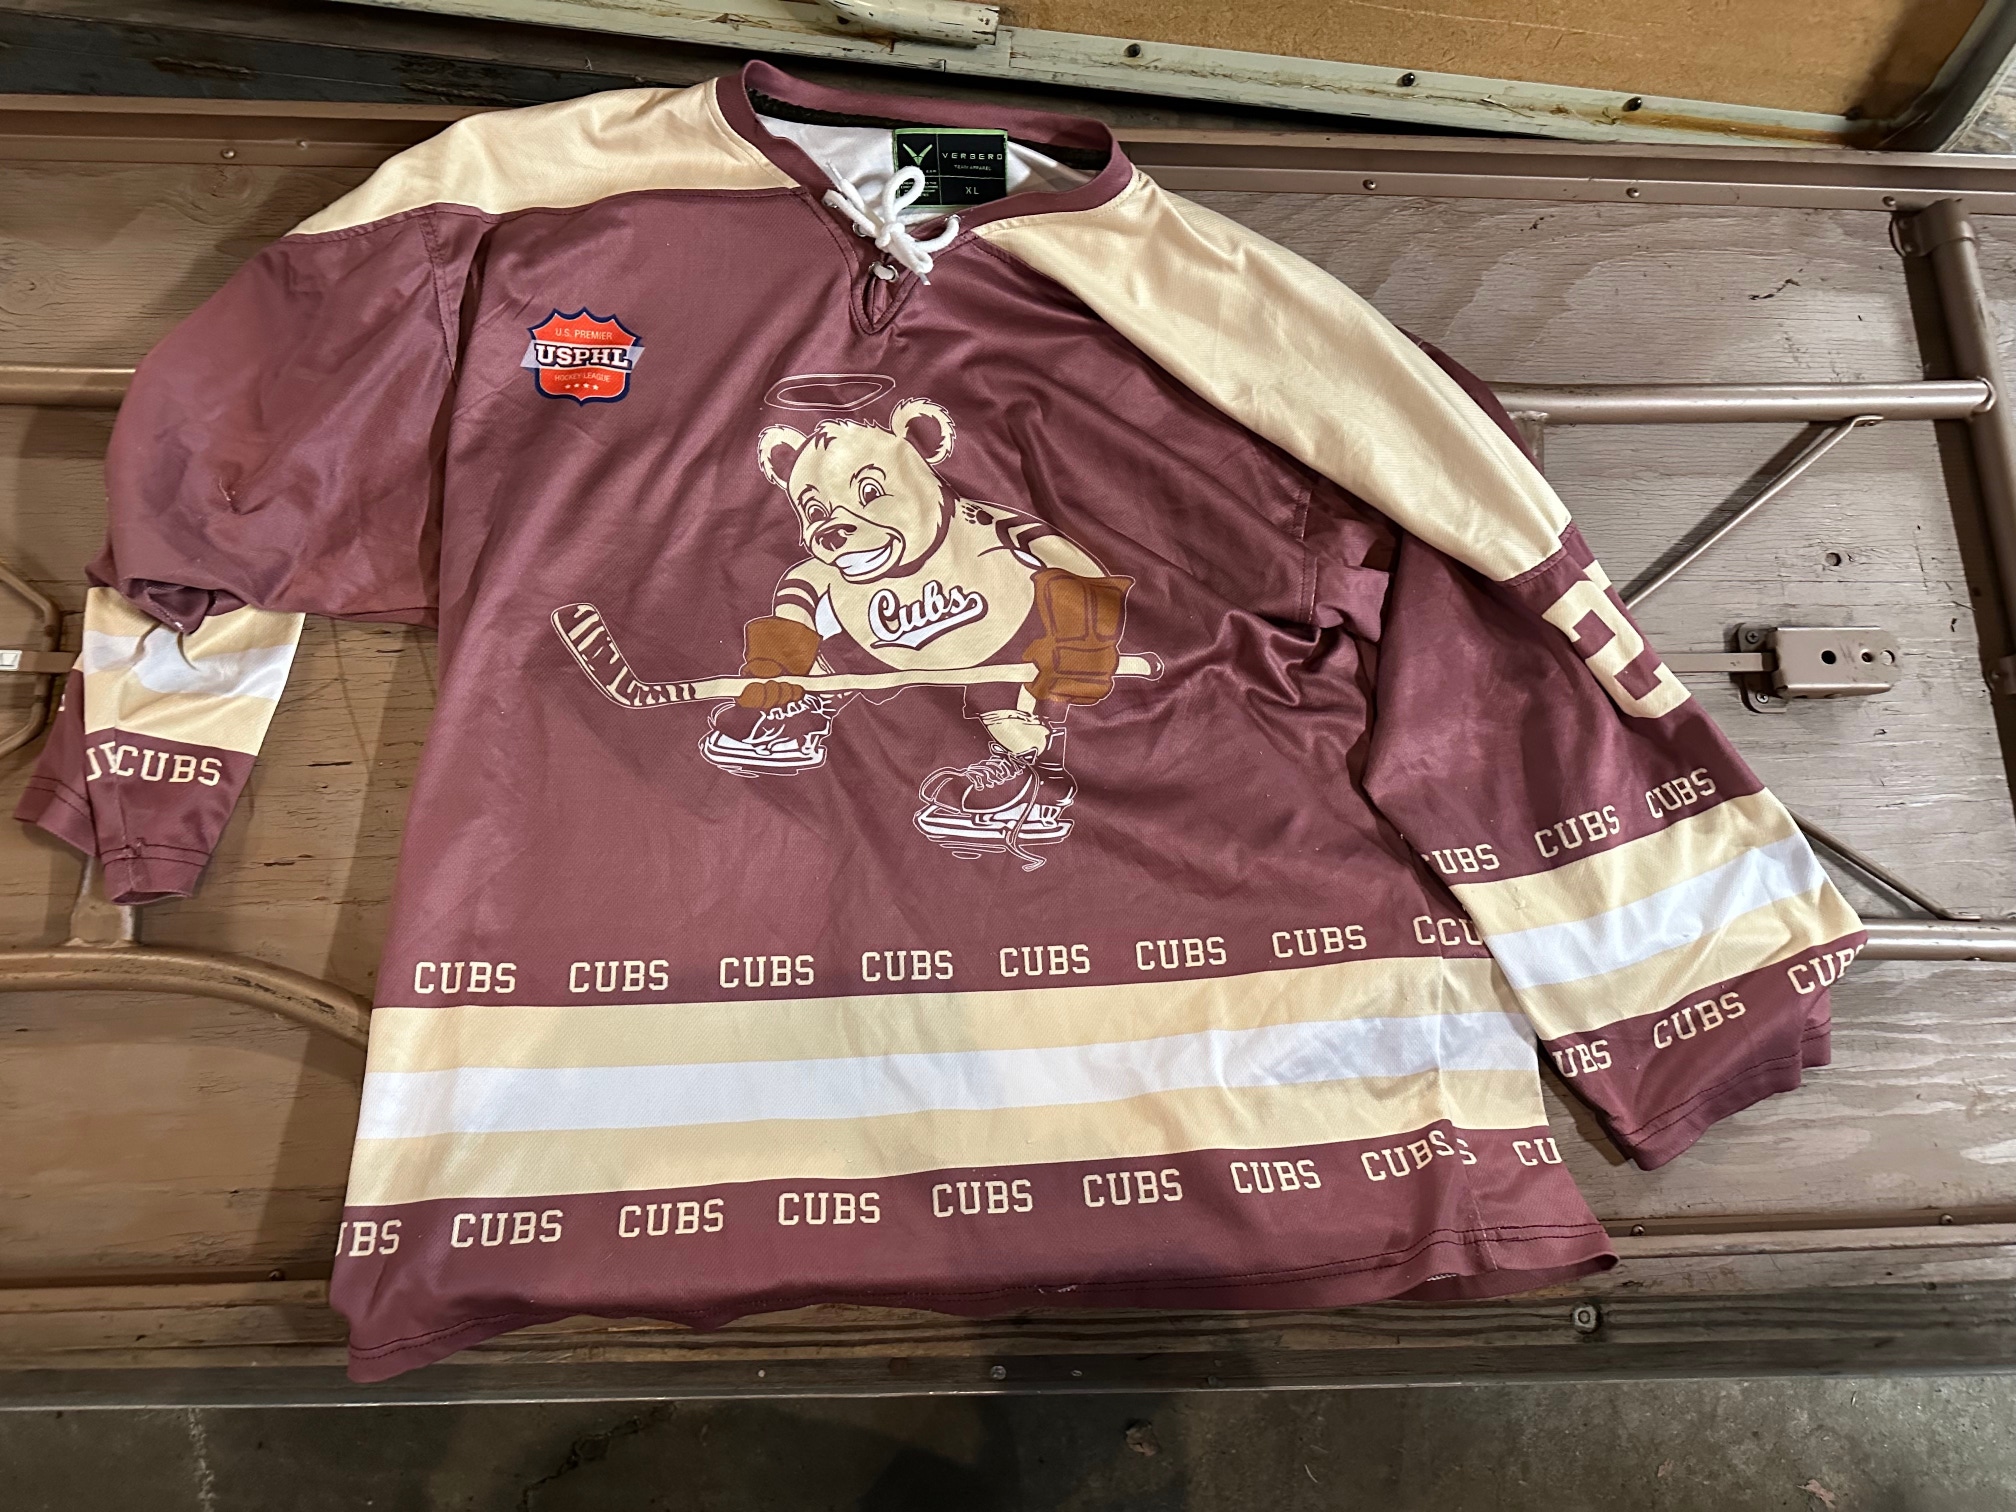 2022-2023 Hershey Cubs Game Used Away Jerseys